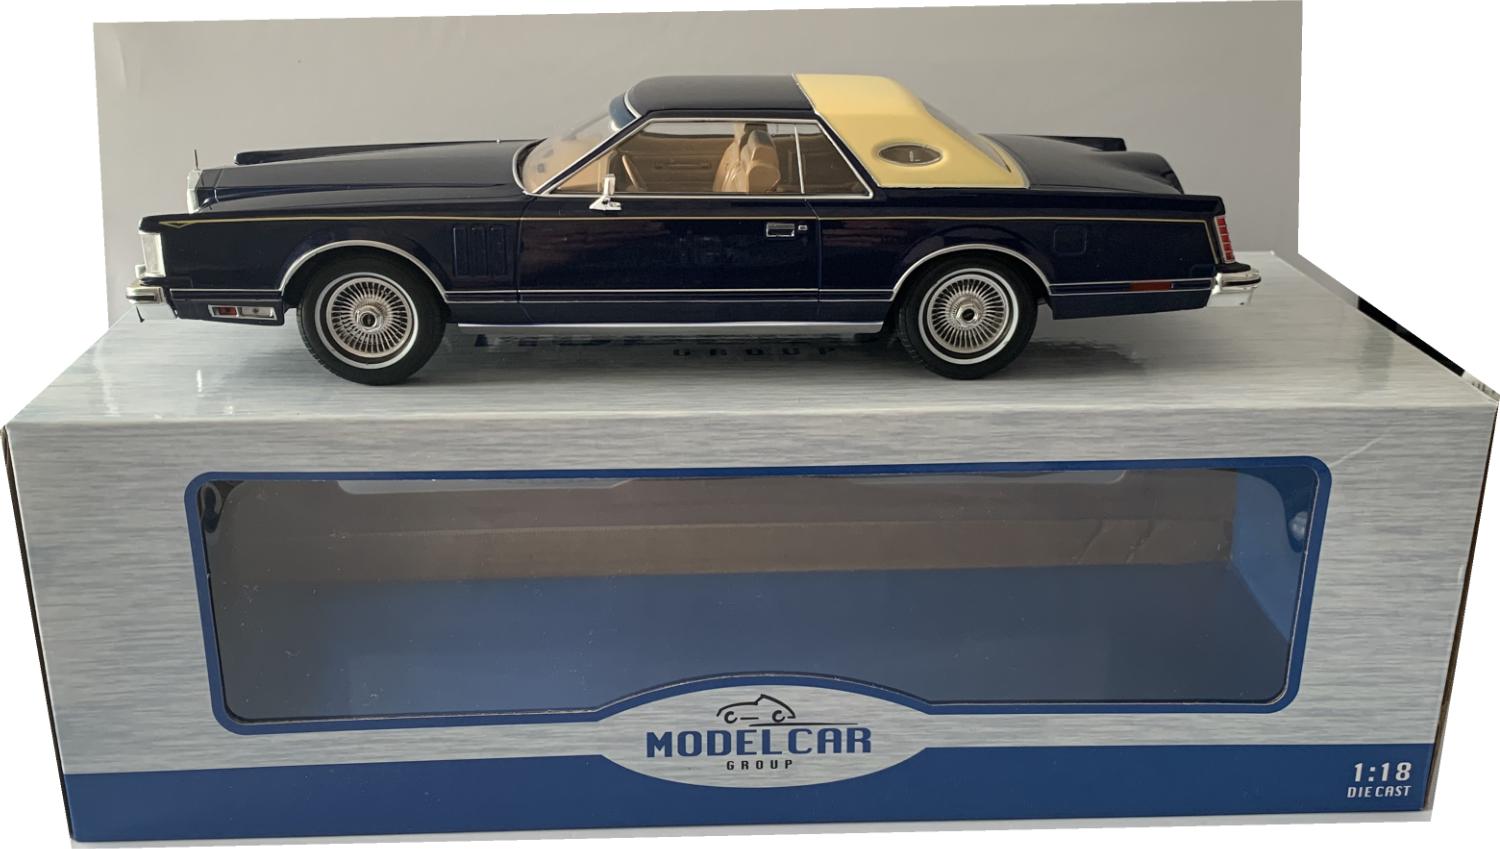 The Continental Model is presented on a removable plinth in a window display box. The car is approx. 32 cm long and the presentation box is 40.5 cm long